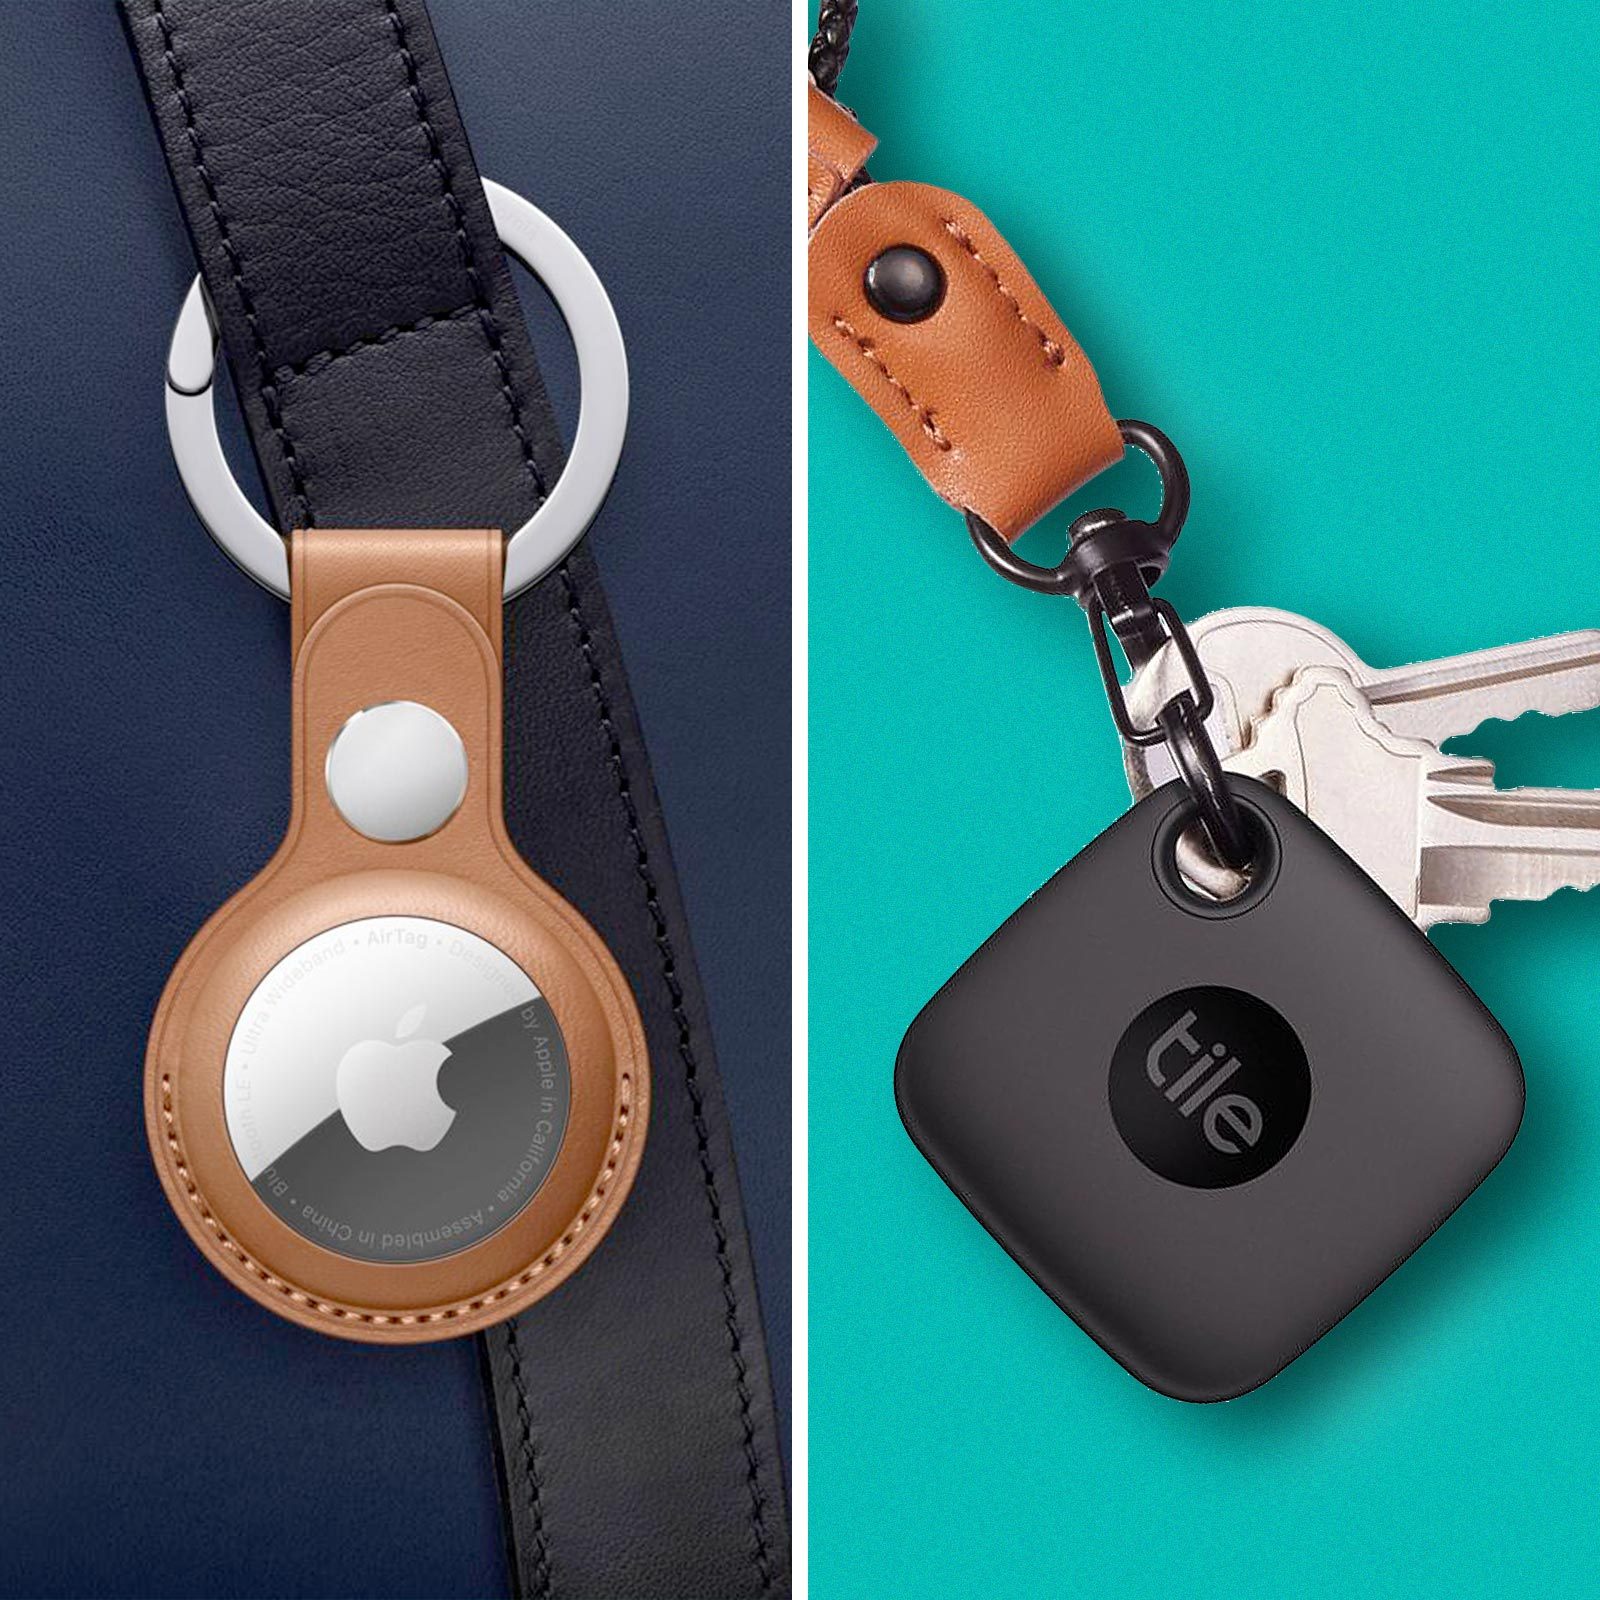 Apple AirTag vs Tile: Which Bluetooth Tracker Is the Best